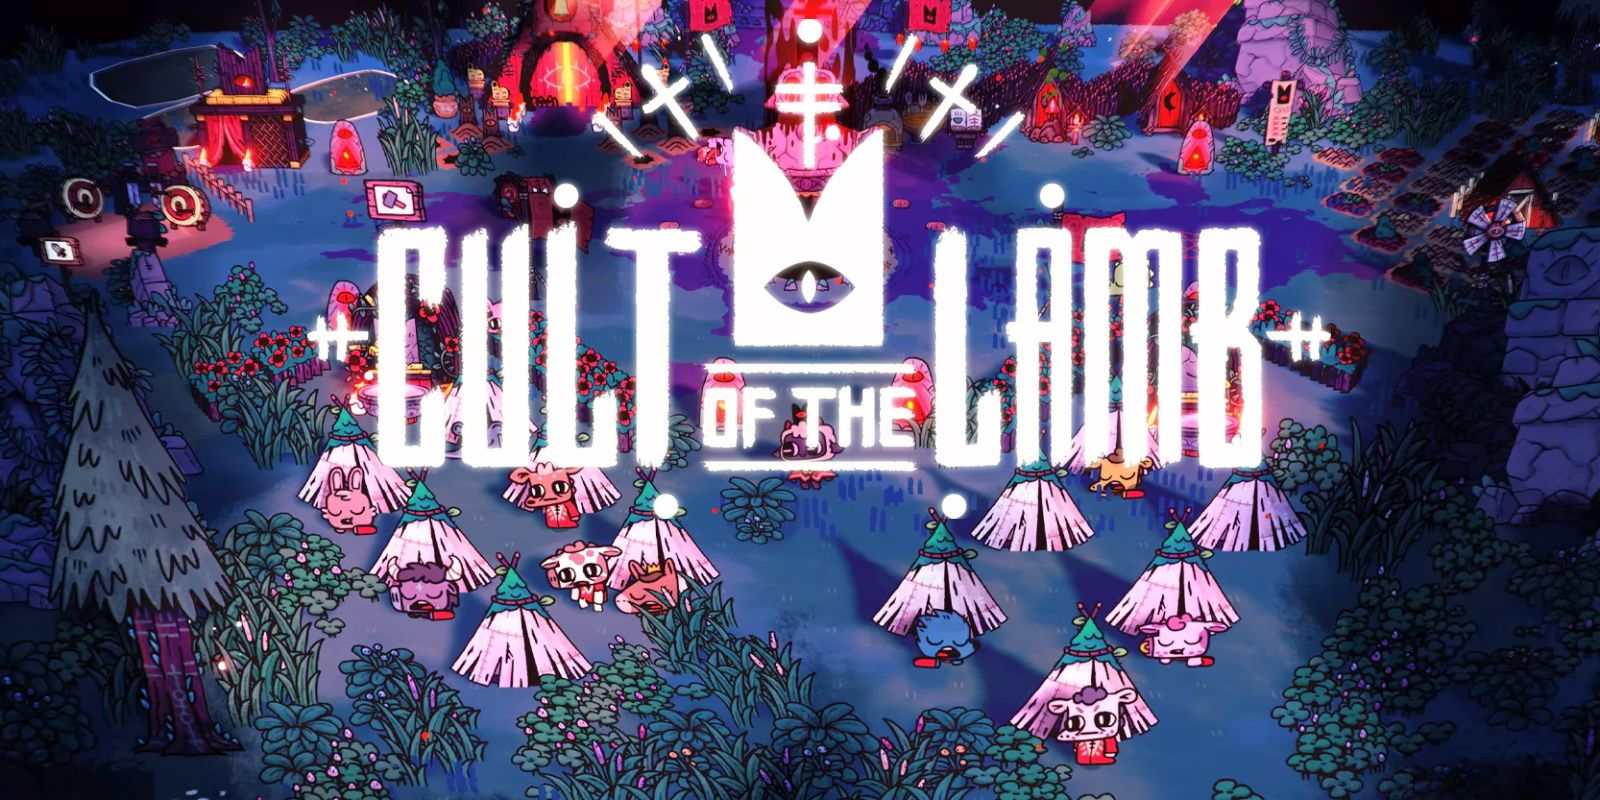 Cult of the Lamb wins GamesHub's Game of the Year 2022